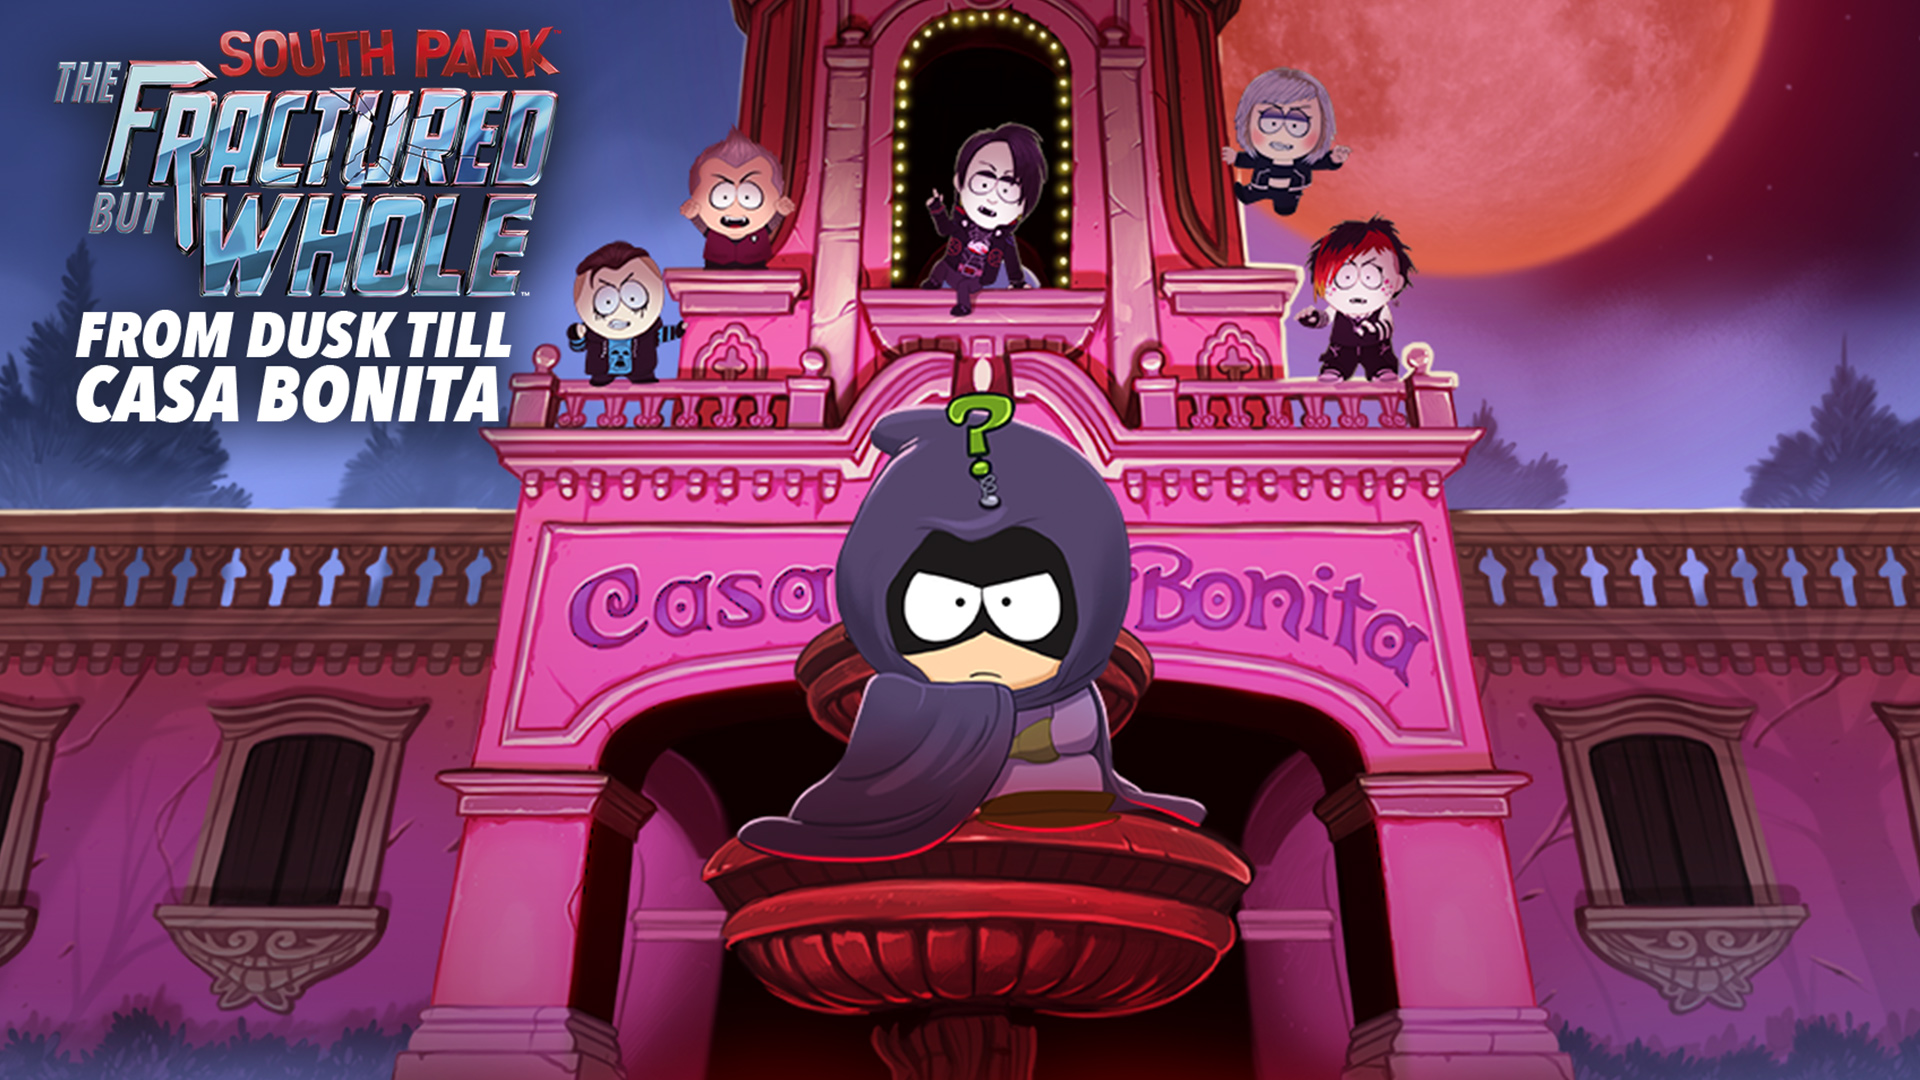 South Park™: The Fractured But Whole™ – From Dusk Till Casa Bonita